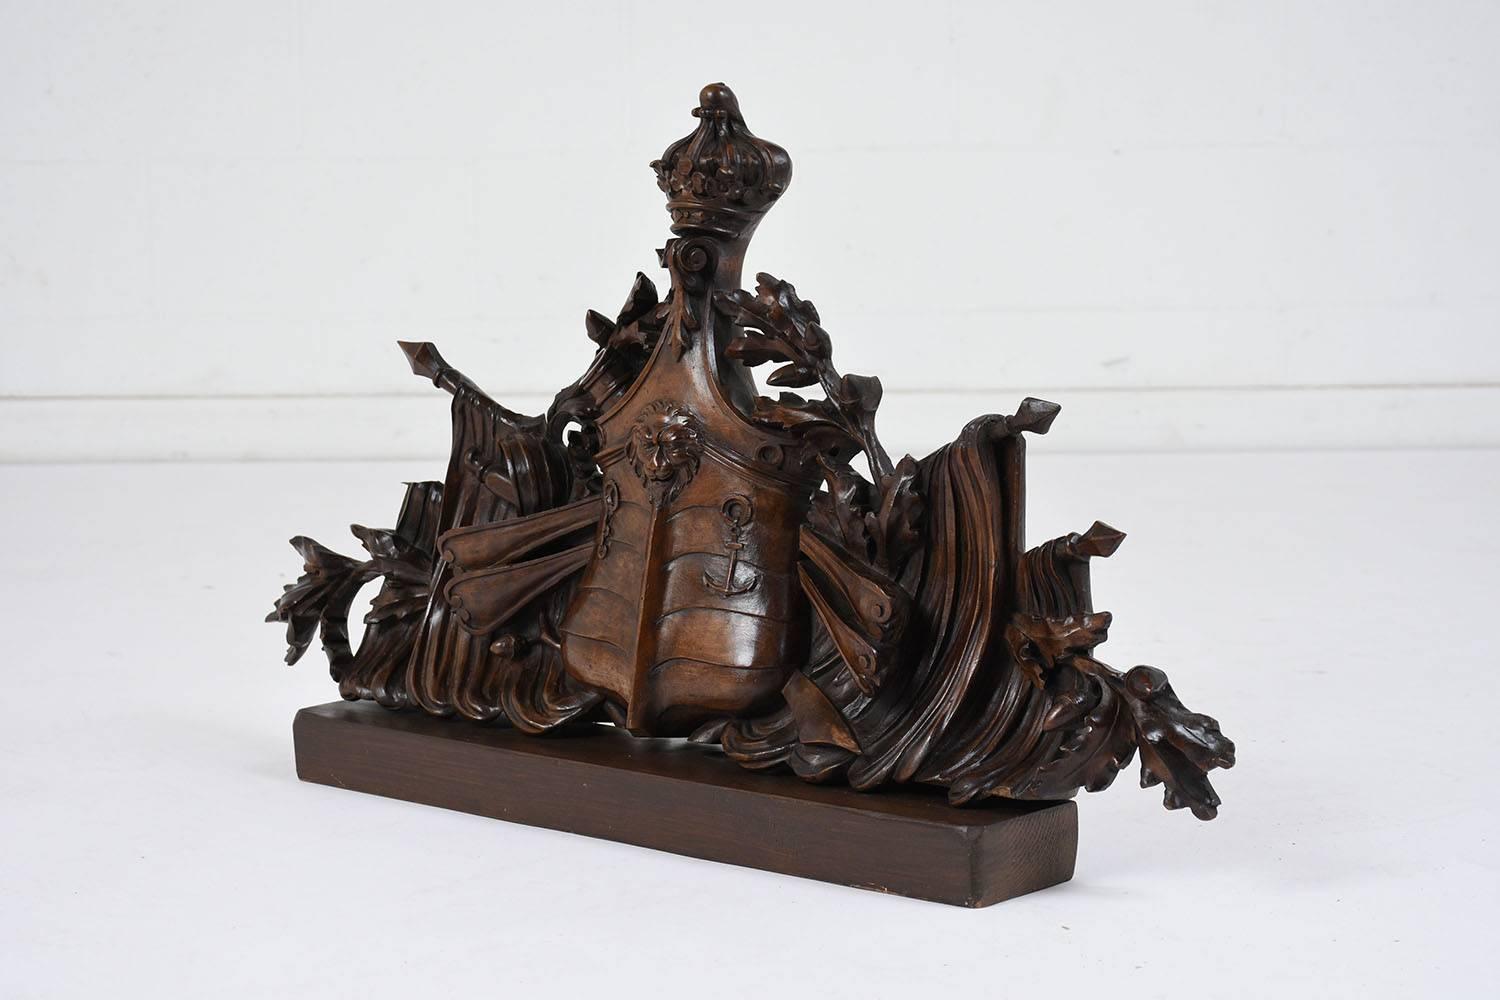 This 1820s French Louis XVI-style pediment is made of walnut wood stained in a deep walnut color with a polished finish. The intricately carved pediment depicts a naval ship with a lion's head on the bow and a crown at the top of the mast and oars